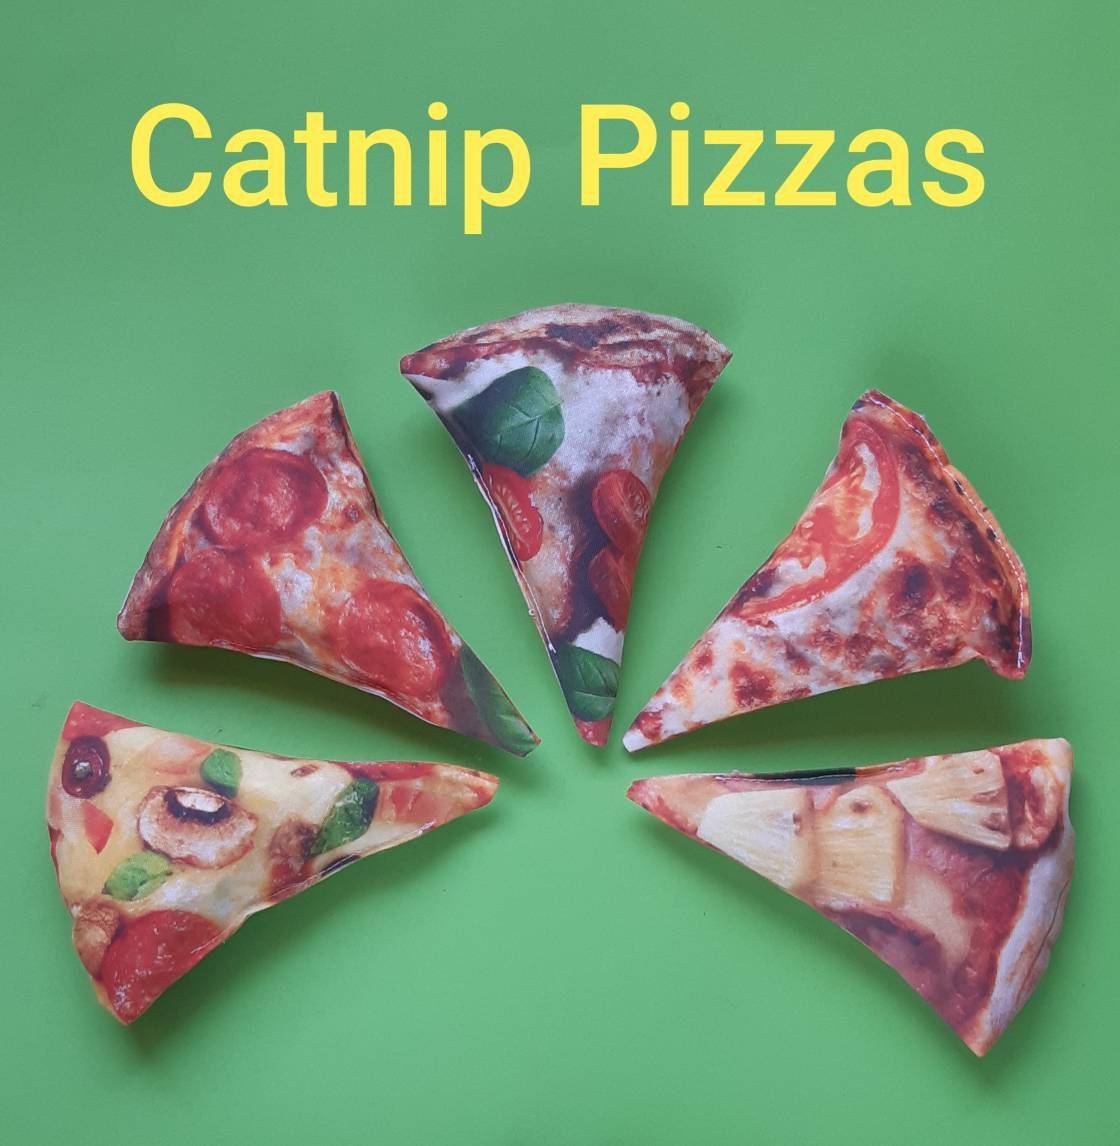 Realistic pizza cat toy – handmade catnip toy filled with fresh catnip – kitten toys, catnip kicker – exclusive design by Crafts4Cats